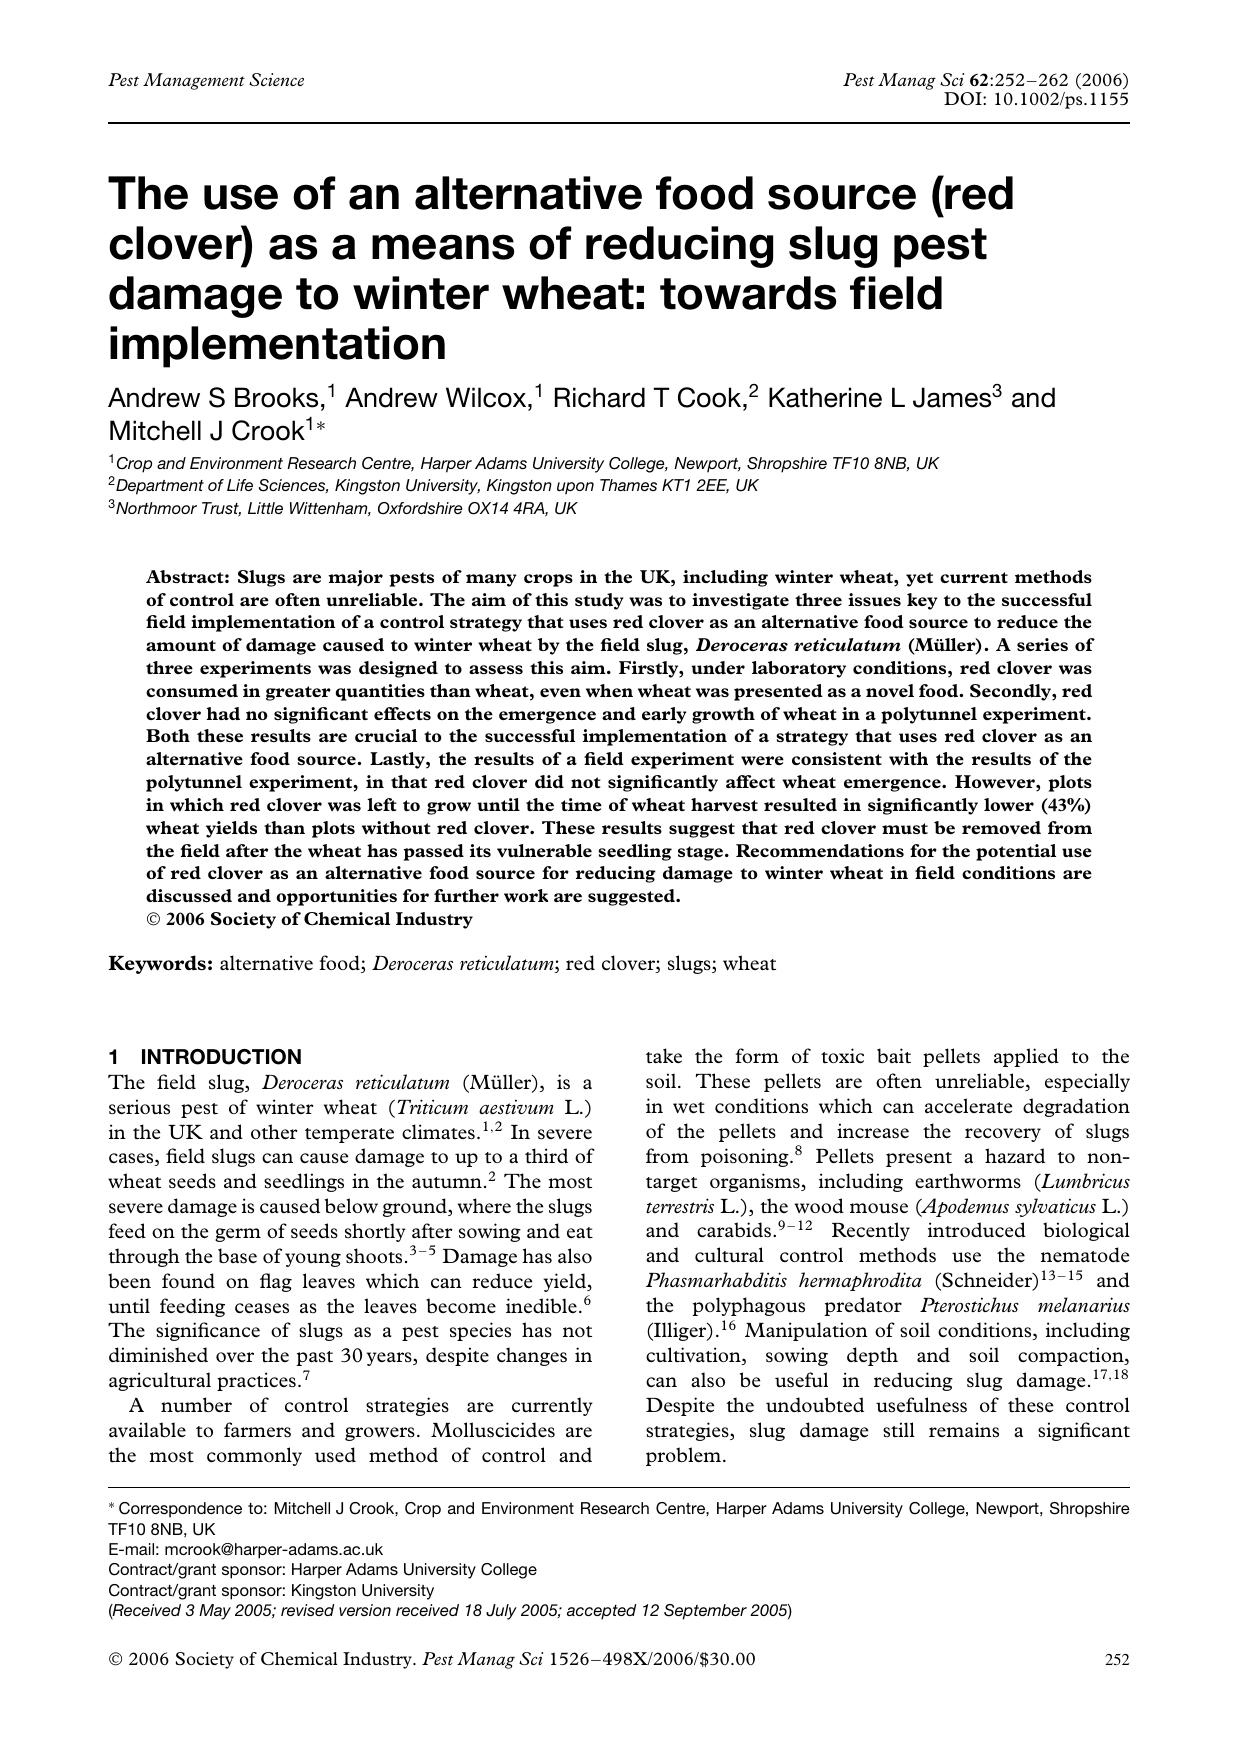 The use of an alternative food source (red clover) as a means of reducing slug pest damage to winter wheat: towards field implementation by Unknown